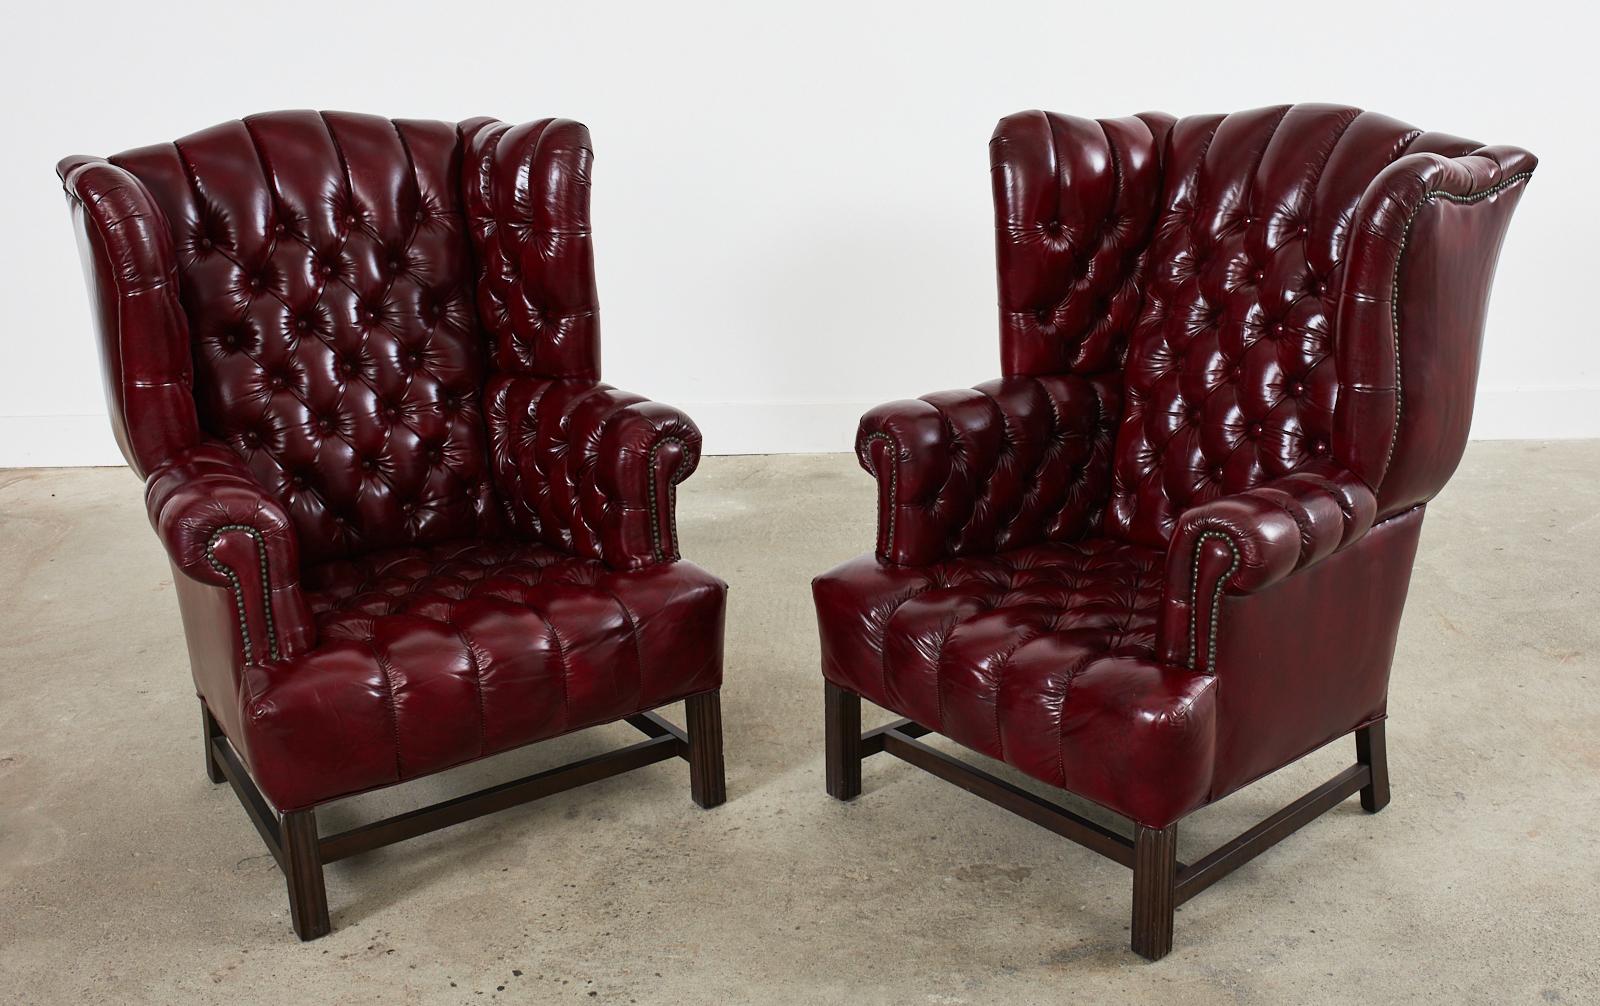 20th Century Pair of English Georgian Style Bonded Leather Tufted Wingback Chairs 